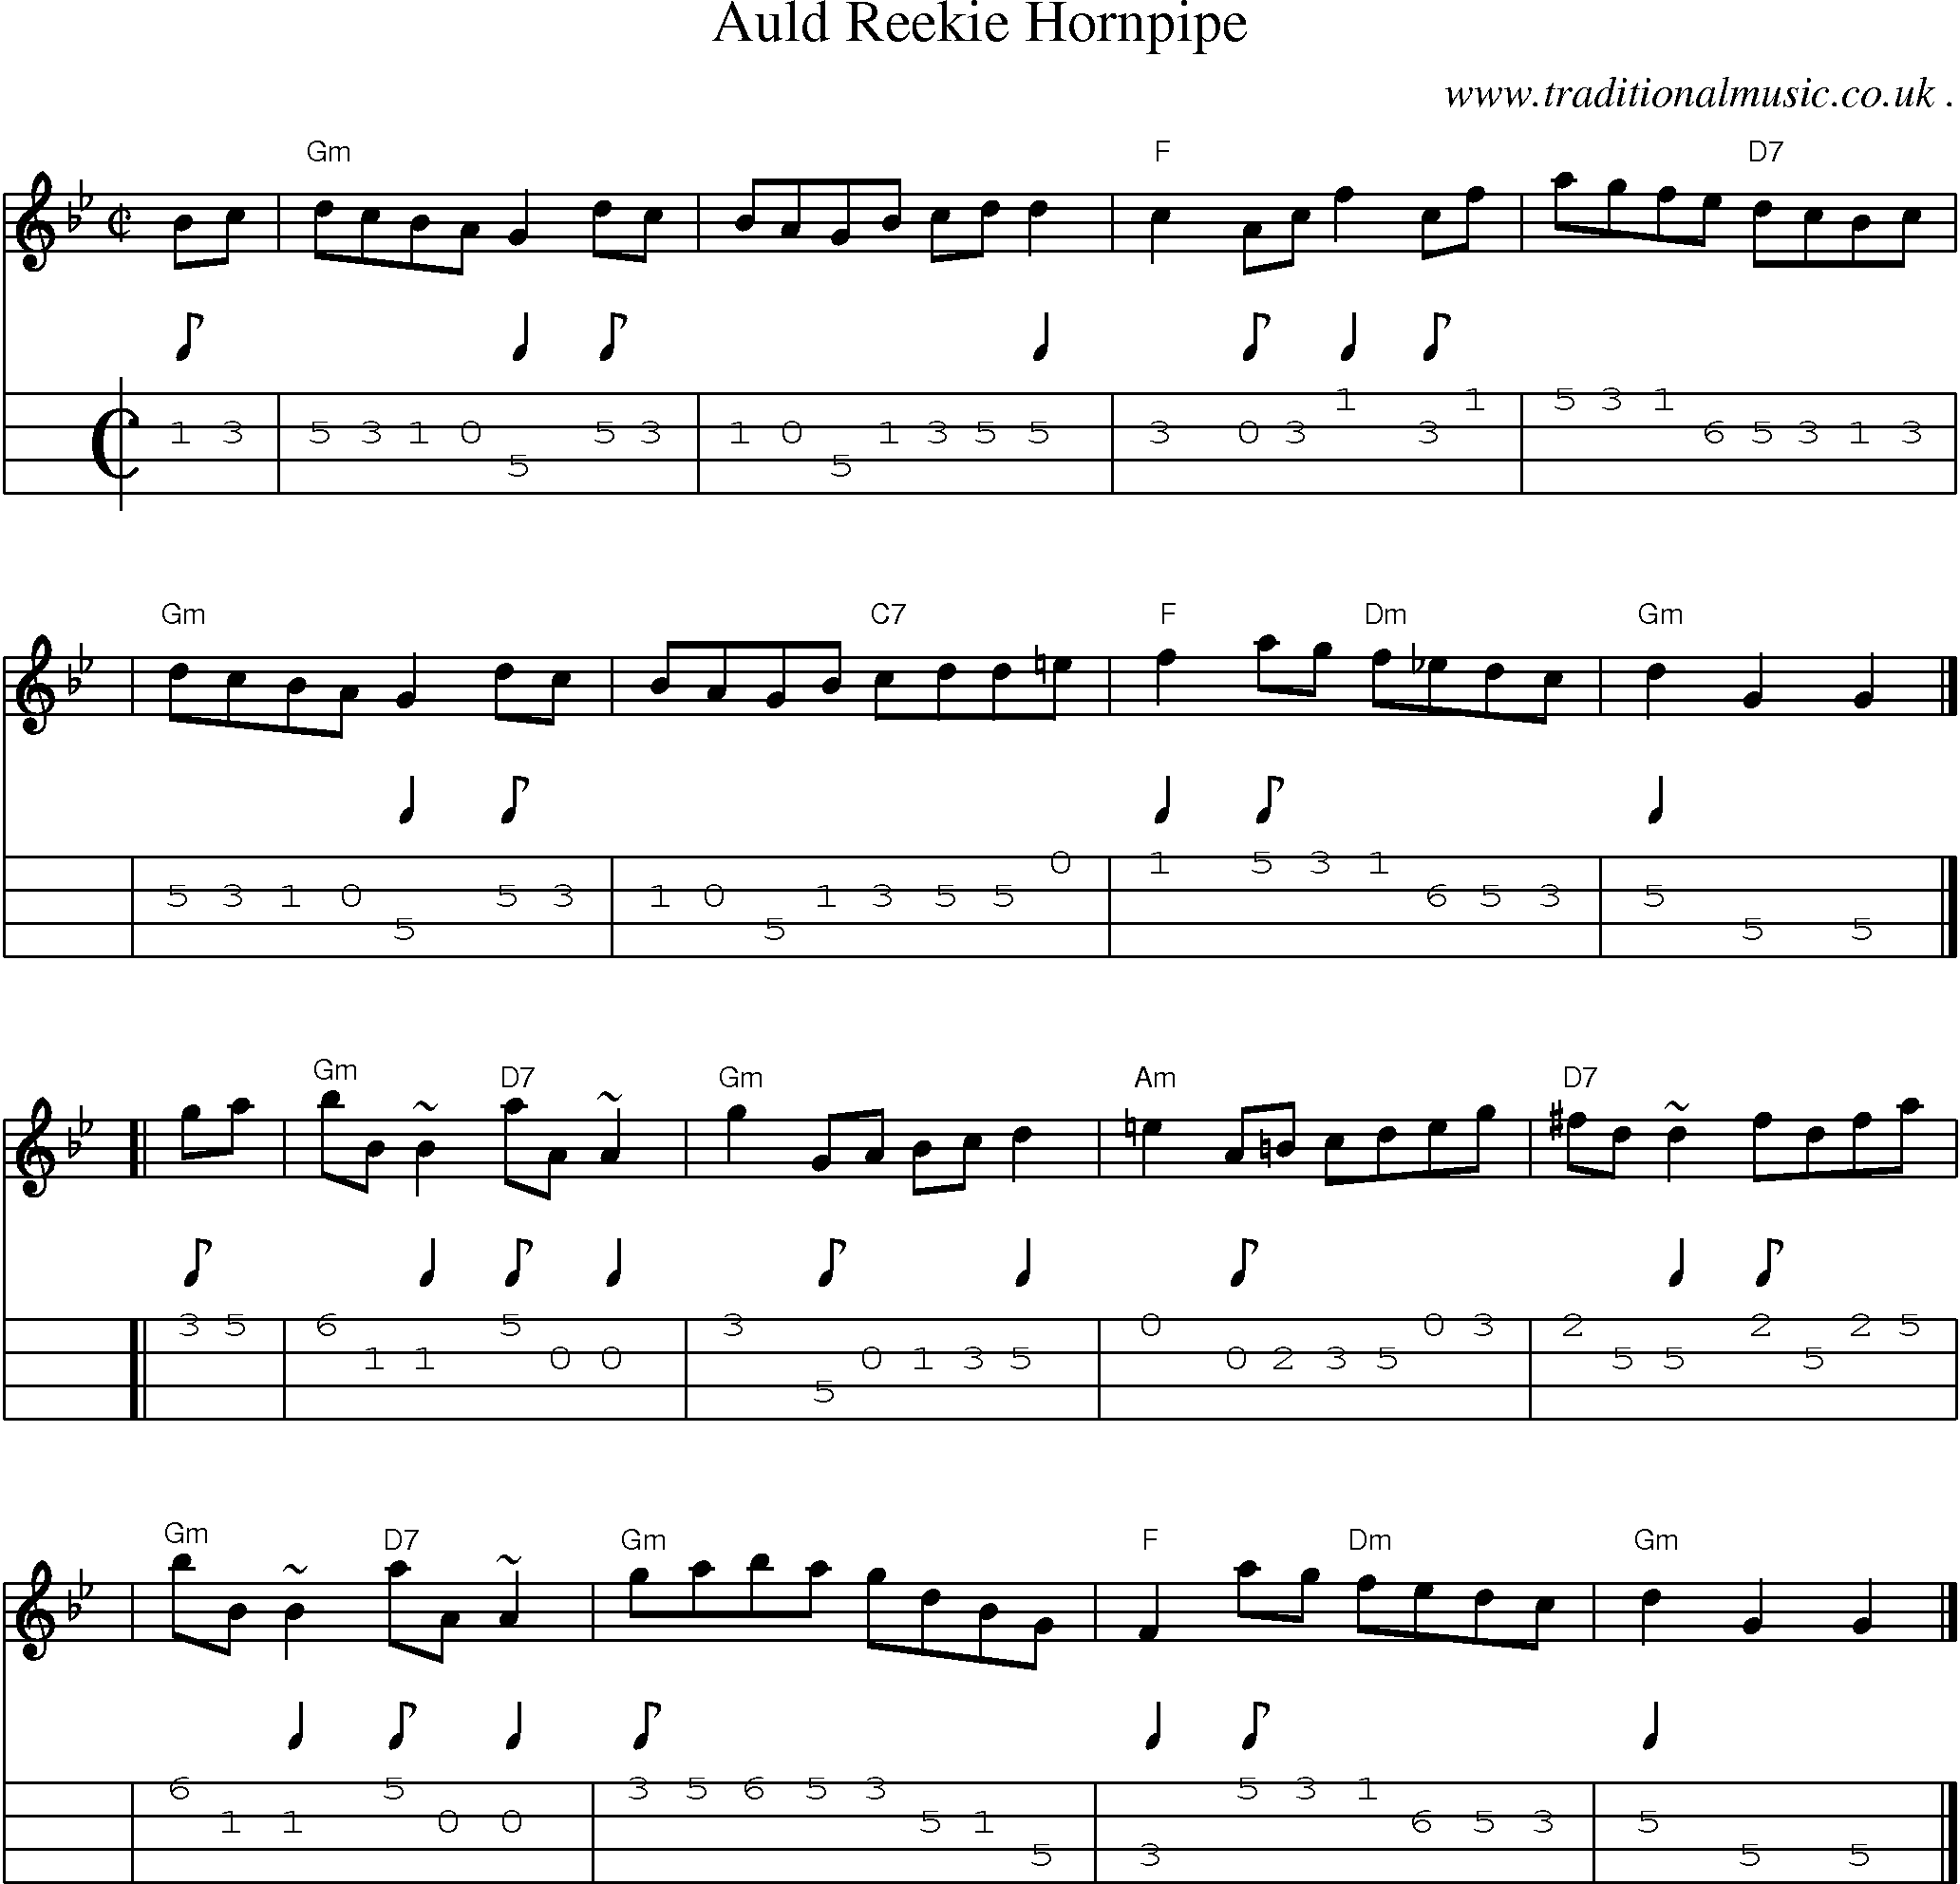 Sheet-music  score, Chords and Mandolin Tabs for Auld Reekie Hornpipe